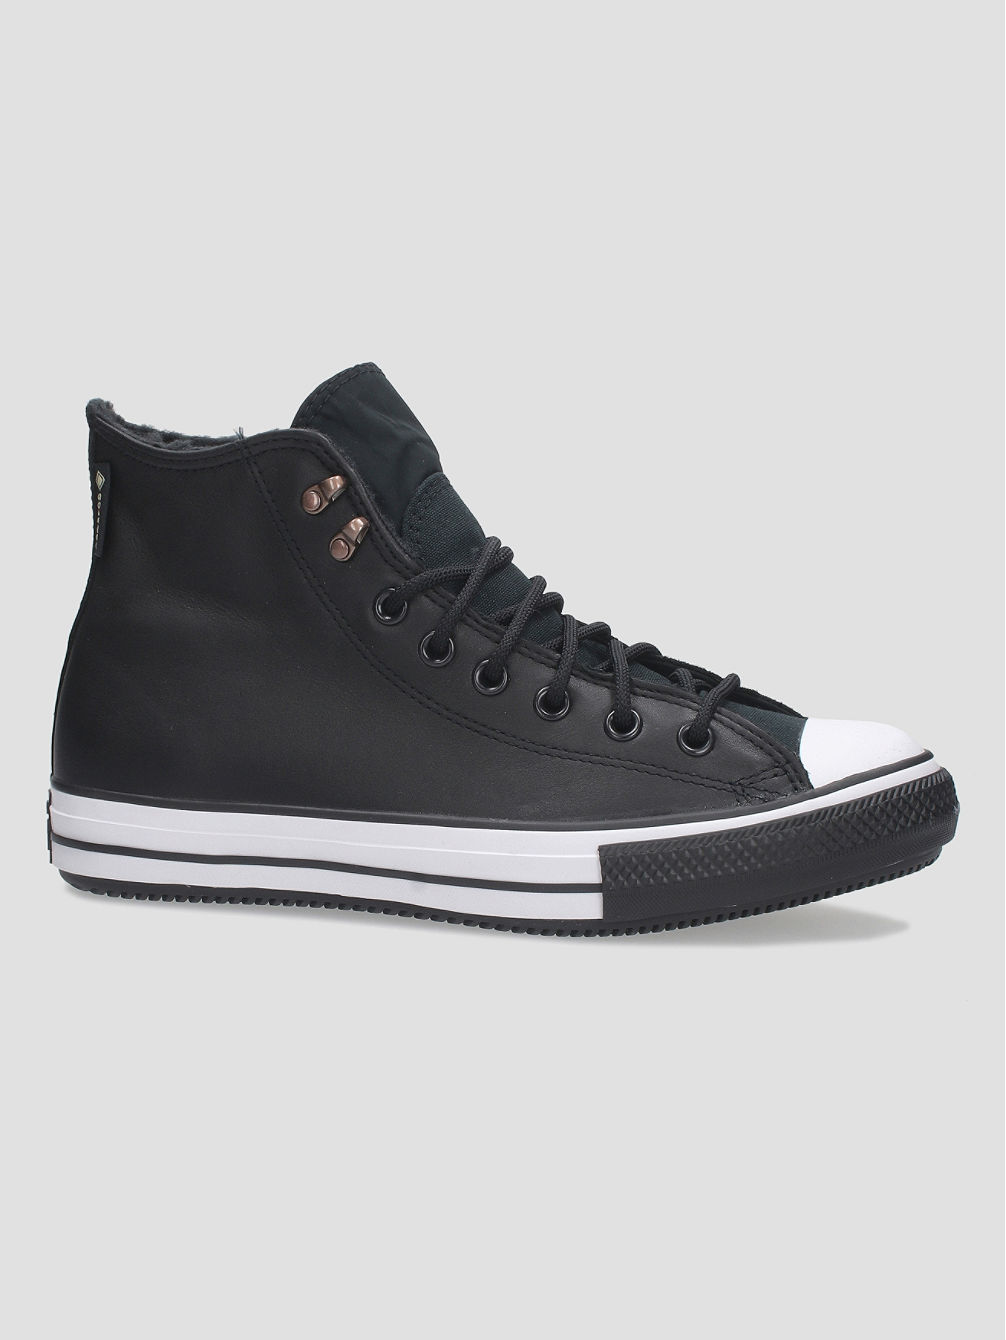 Chuck Taylor All Star Winter Gore-Tex Shoes